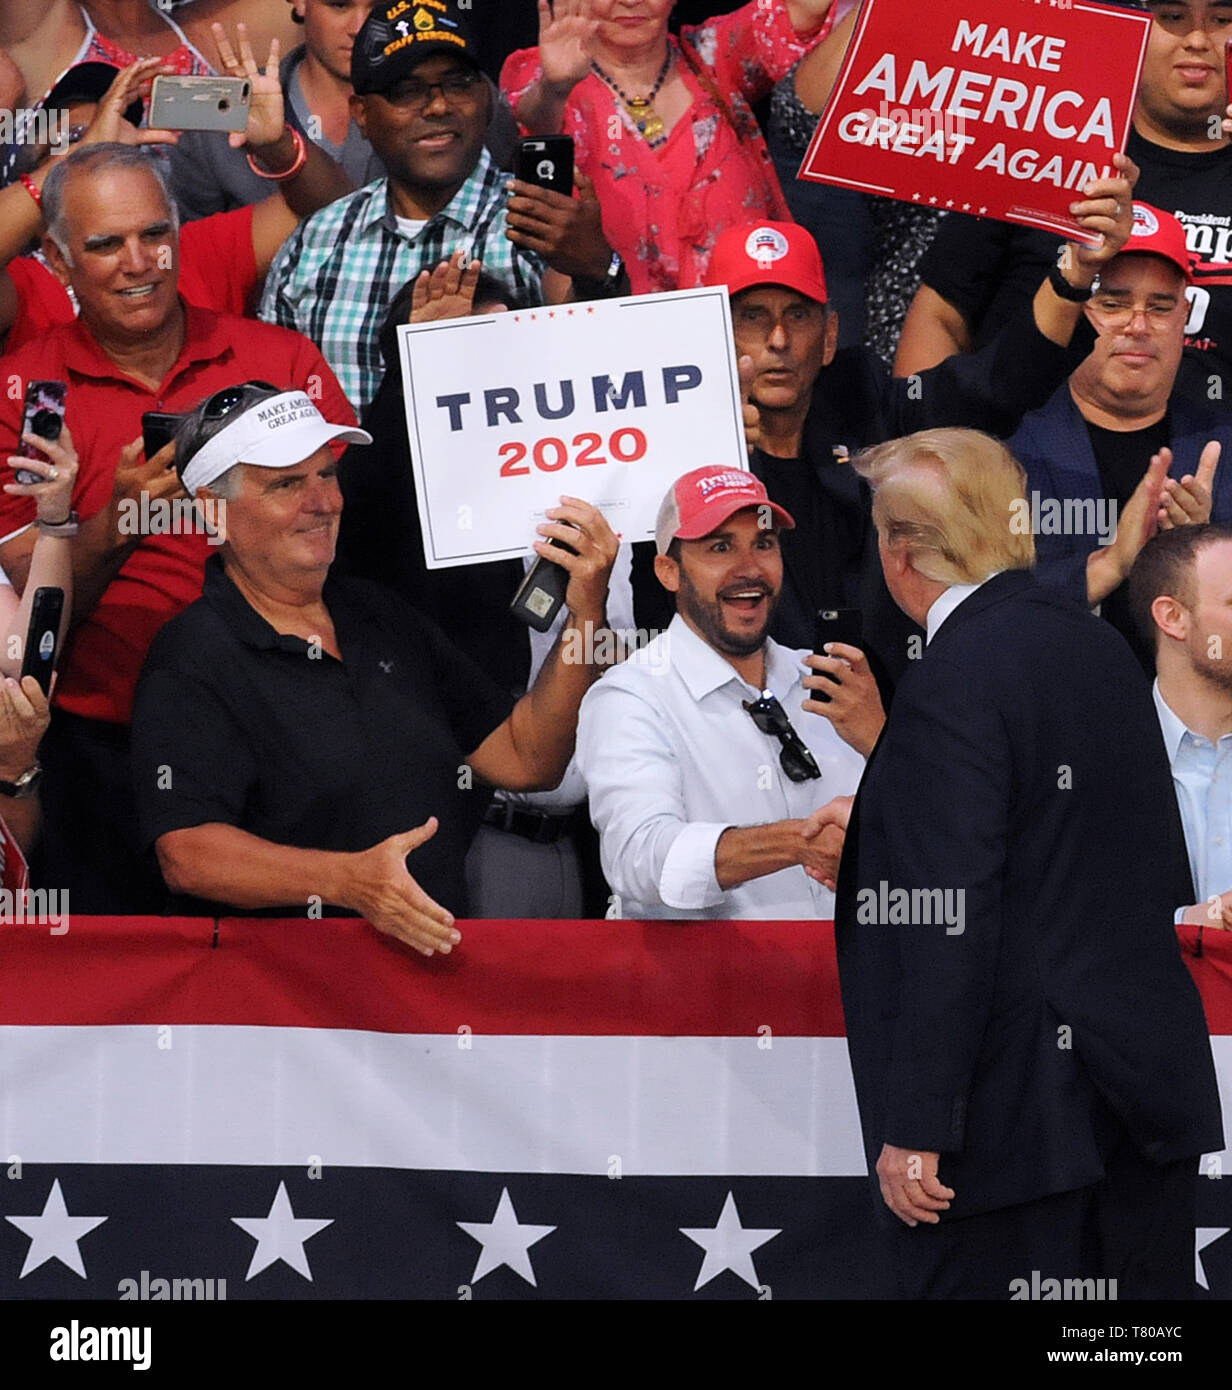 Panama City Beach, Florida, USA. 08th May, 2019. U.S. President Donald Trump greets supporters before speaking at a Make America Great Again rally at the Aaron Bessant Park  Amphitheater on May 8, 2019 in Panama City Beach, Florida. (Paul Hennessy/Alamy) Credit: Paul Hennessy/Alamy Live News Stock Photo